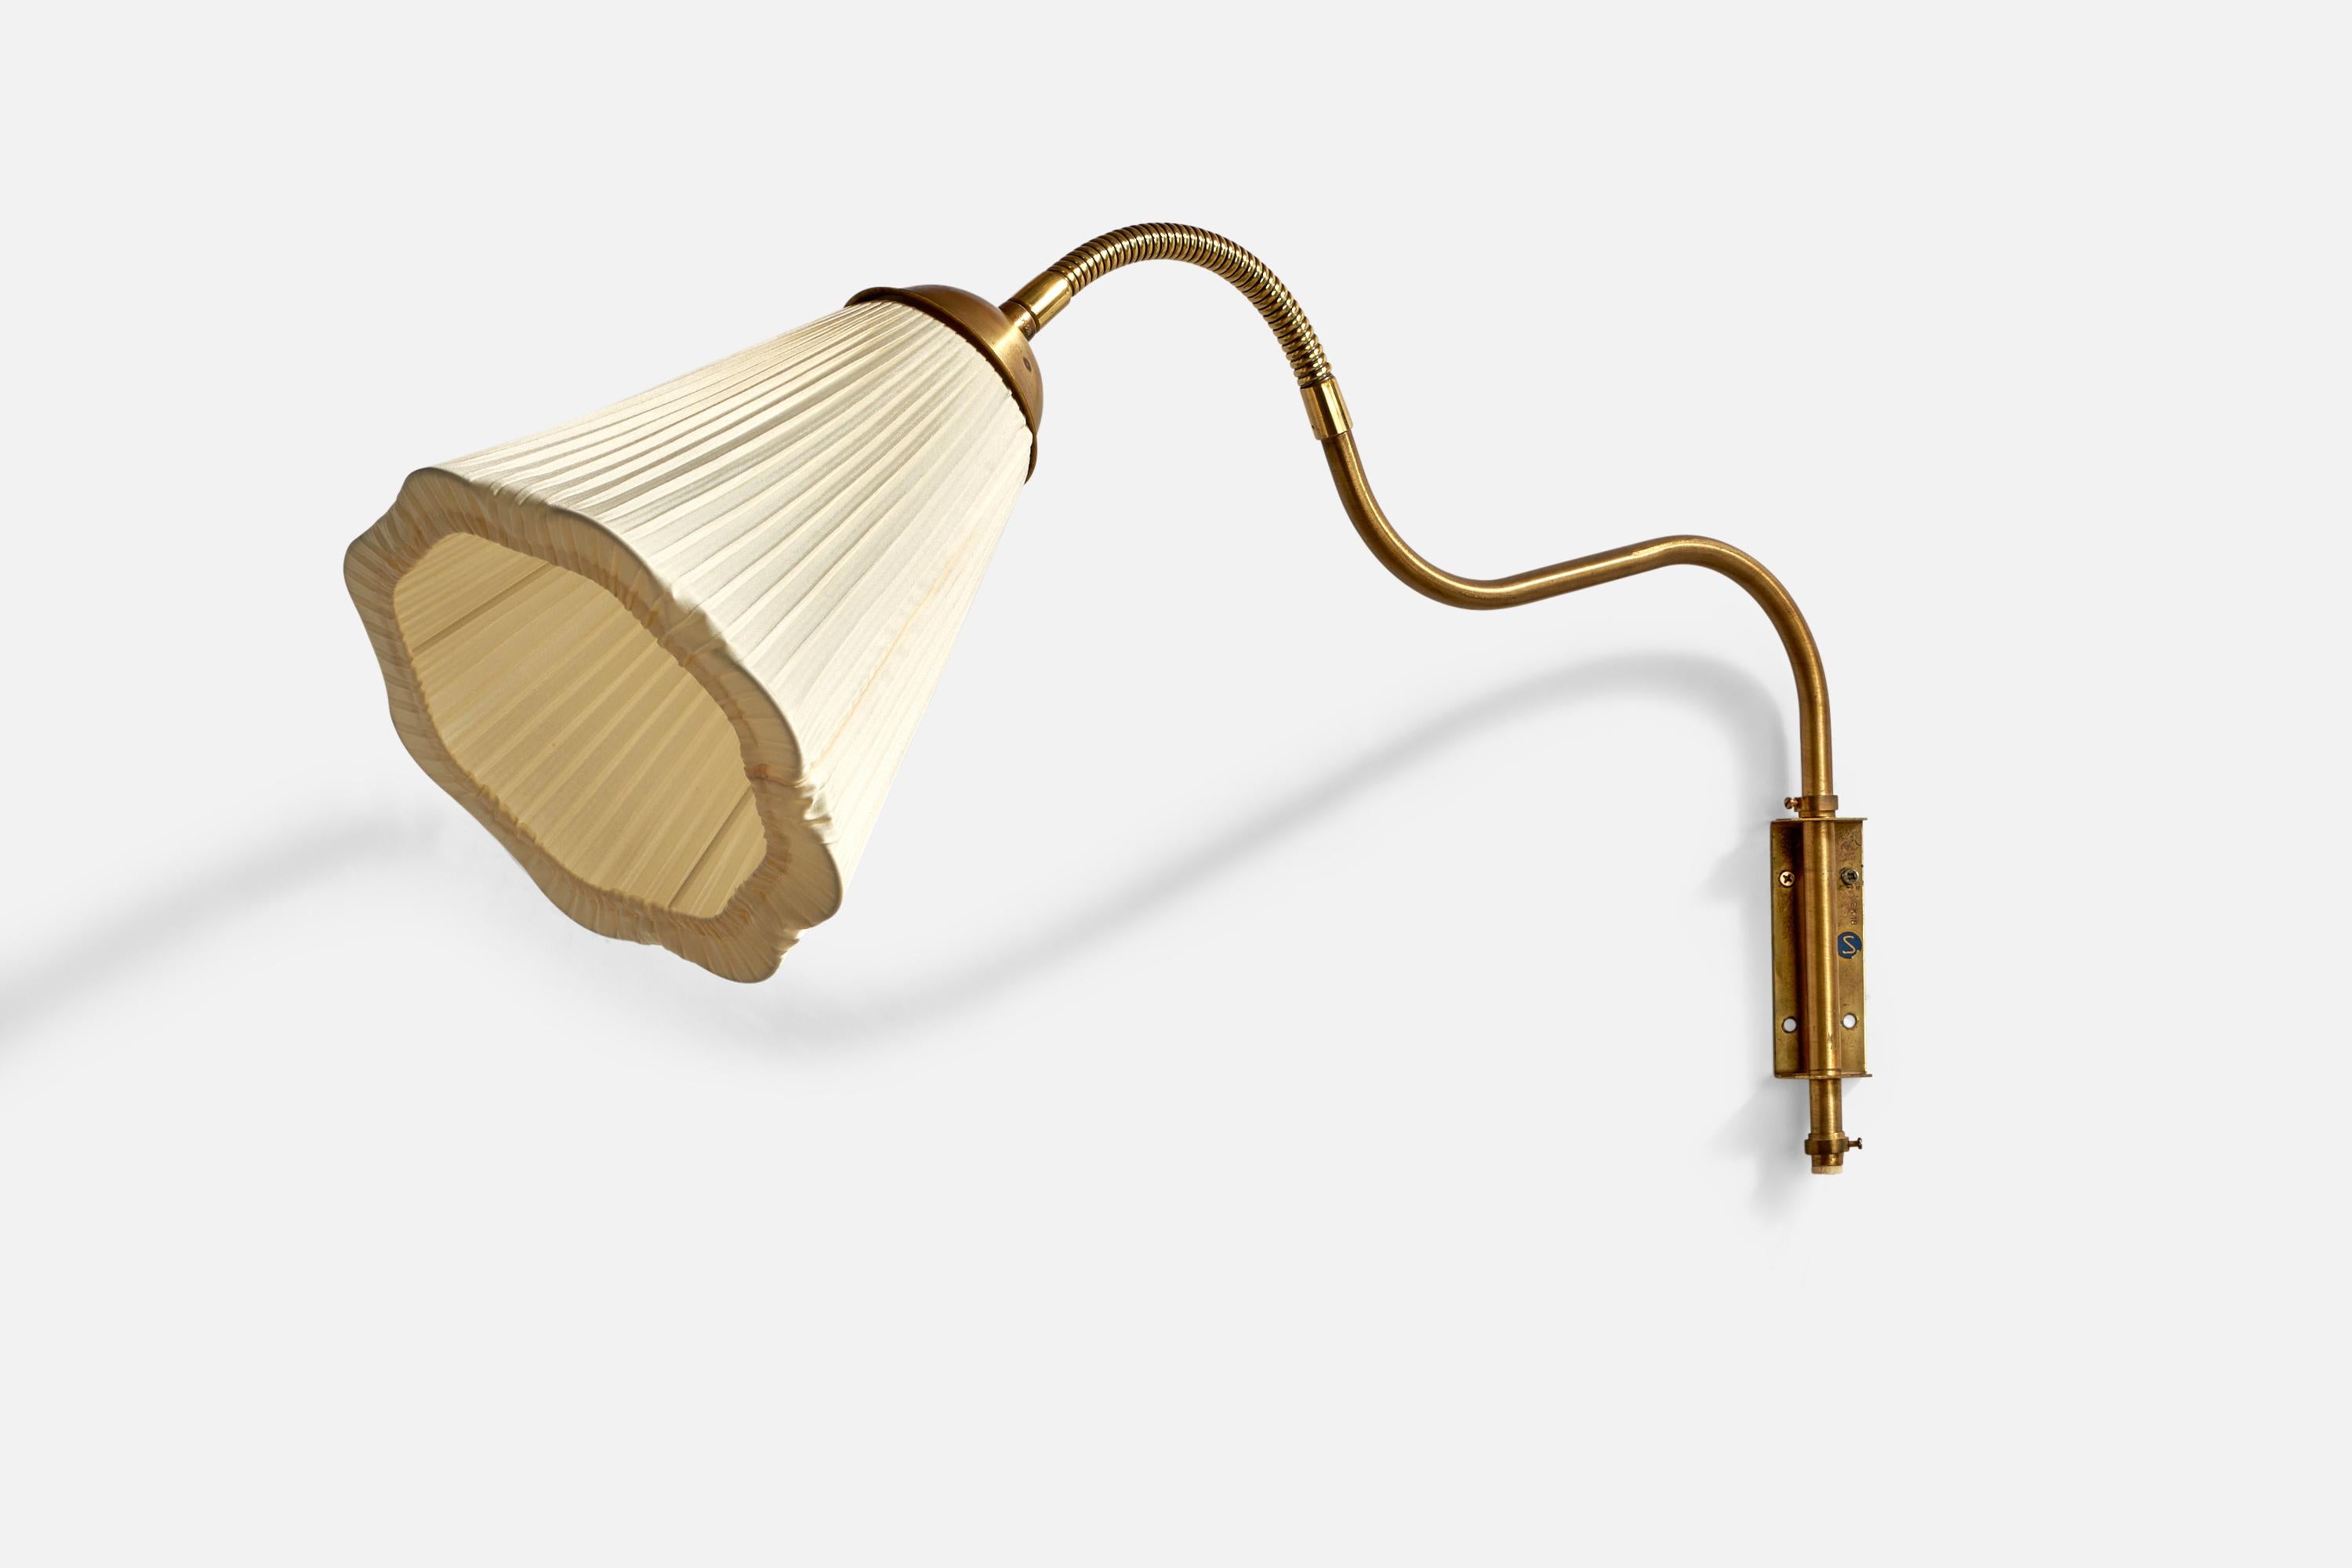 An adjustable organic brass and off-white fabric wall light designed and produced in Sweden, 1940s.

Overall Dimensions (inches): 21” H x 8.55” W x 27” D
Back Plate Dimensions (inches): 4.1” H x 1.5” W x 1” D
Bulb Specifications: E-26 Bulb
Number of